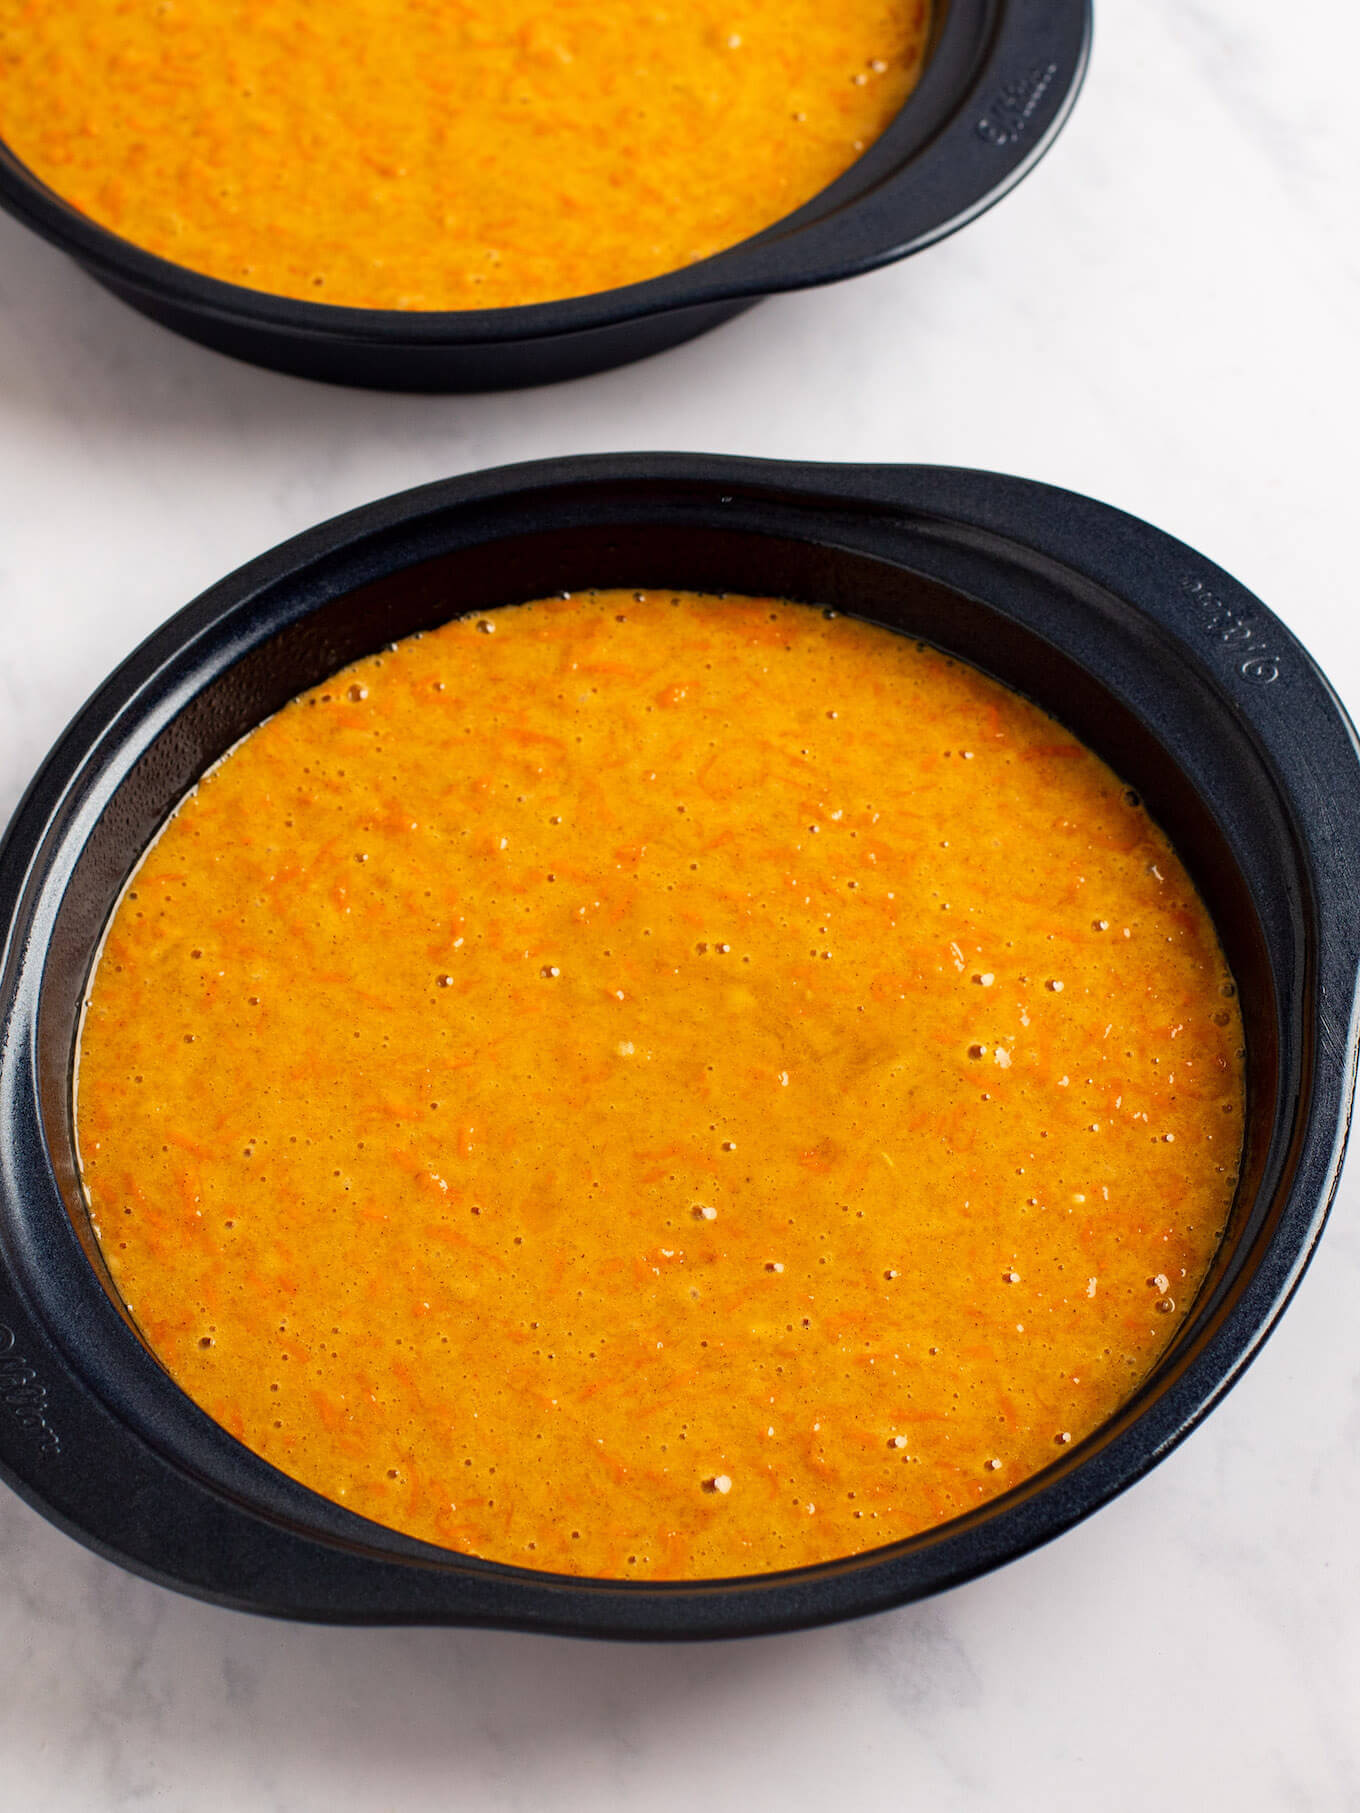 Carrot cake batter poured into two 9-inch round cake pans.